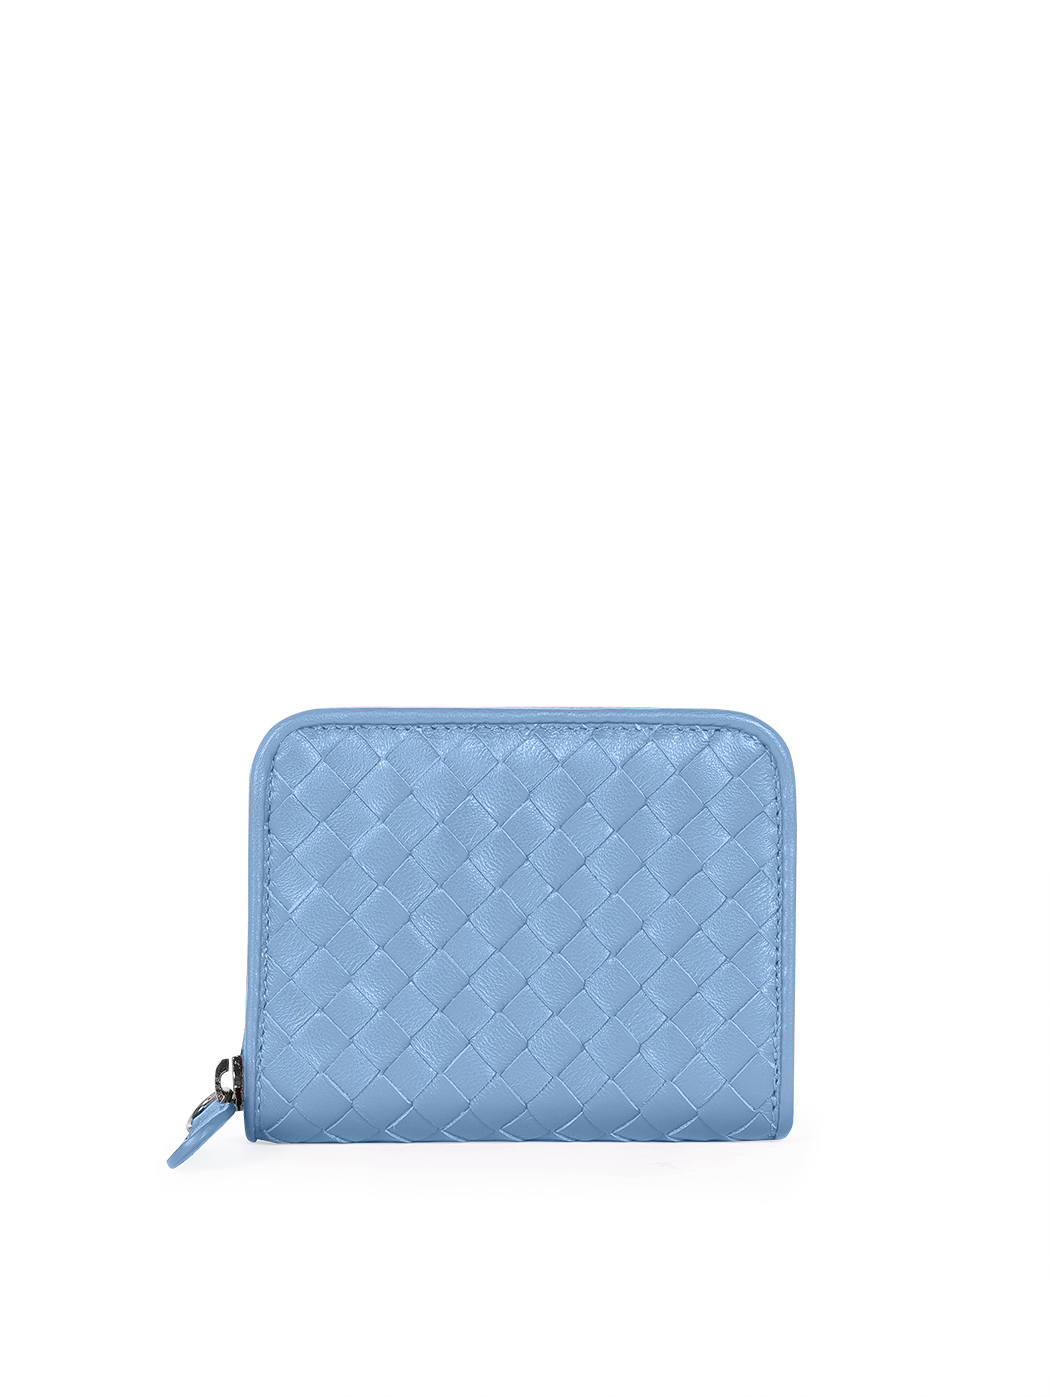 Compact zip-around wallet in blue woven leather